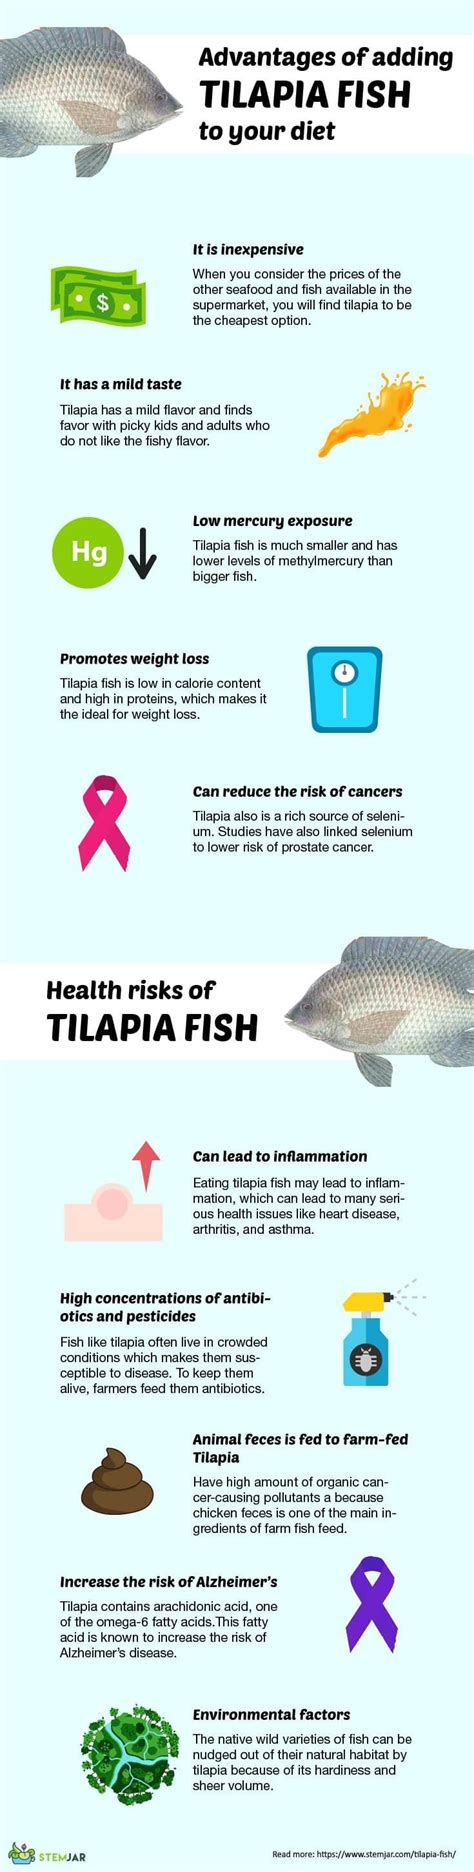 Tilapia Fish Nutritional Facts Benefits And Health Risks Fish